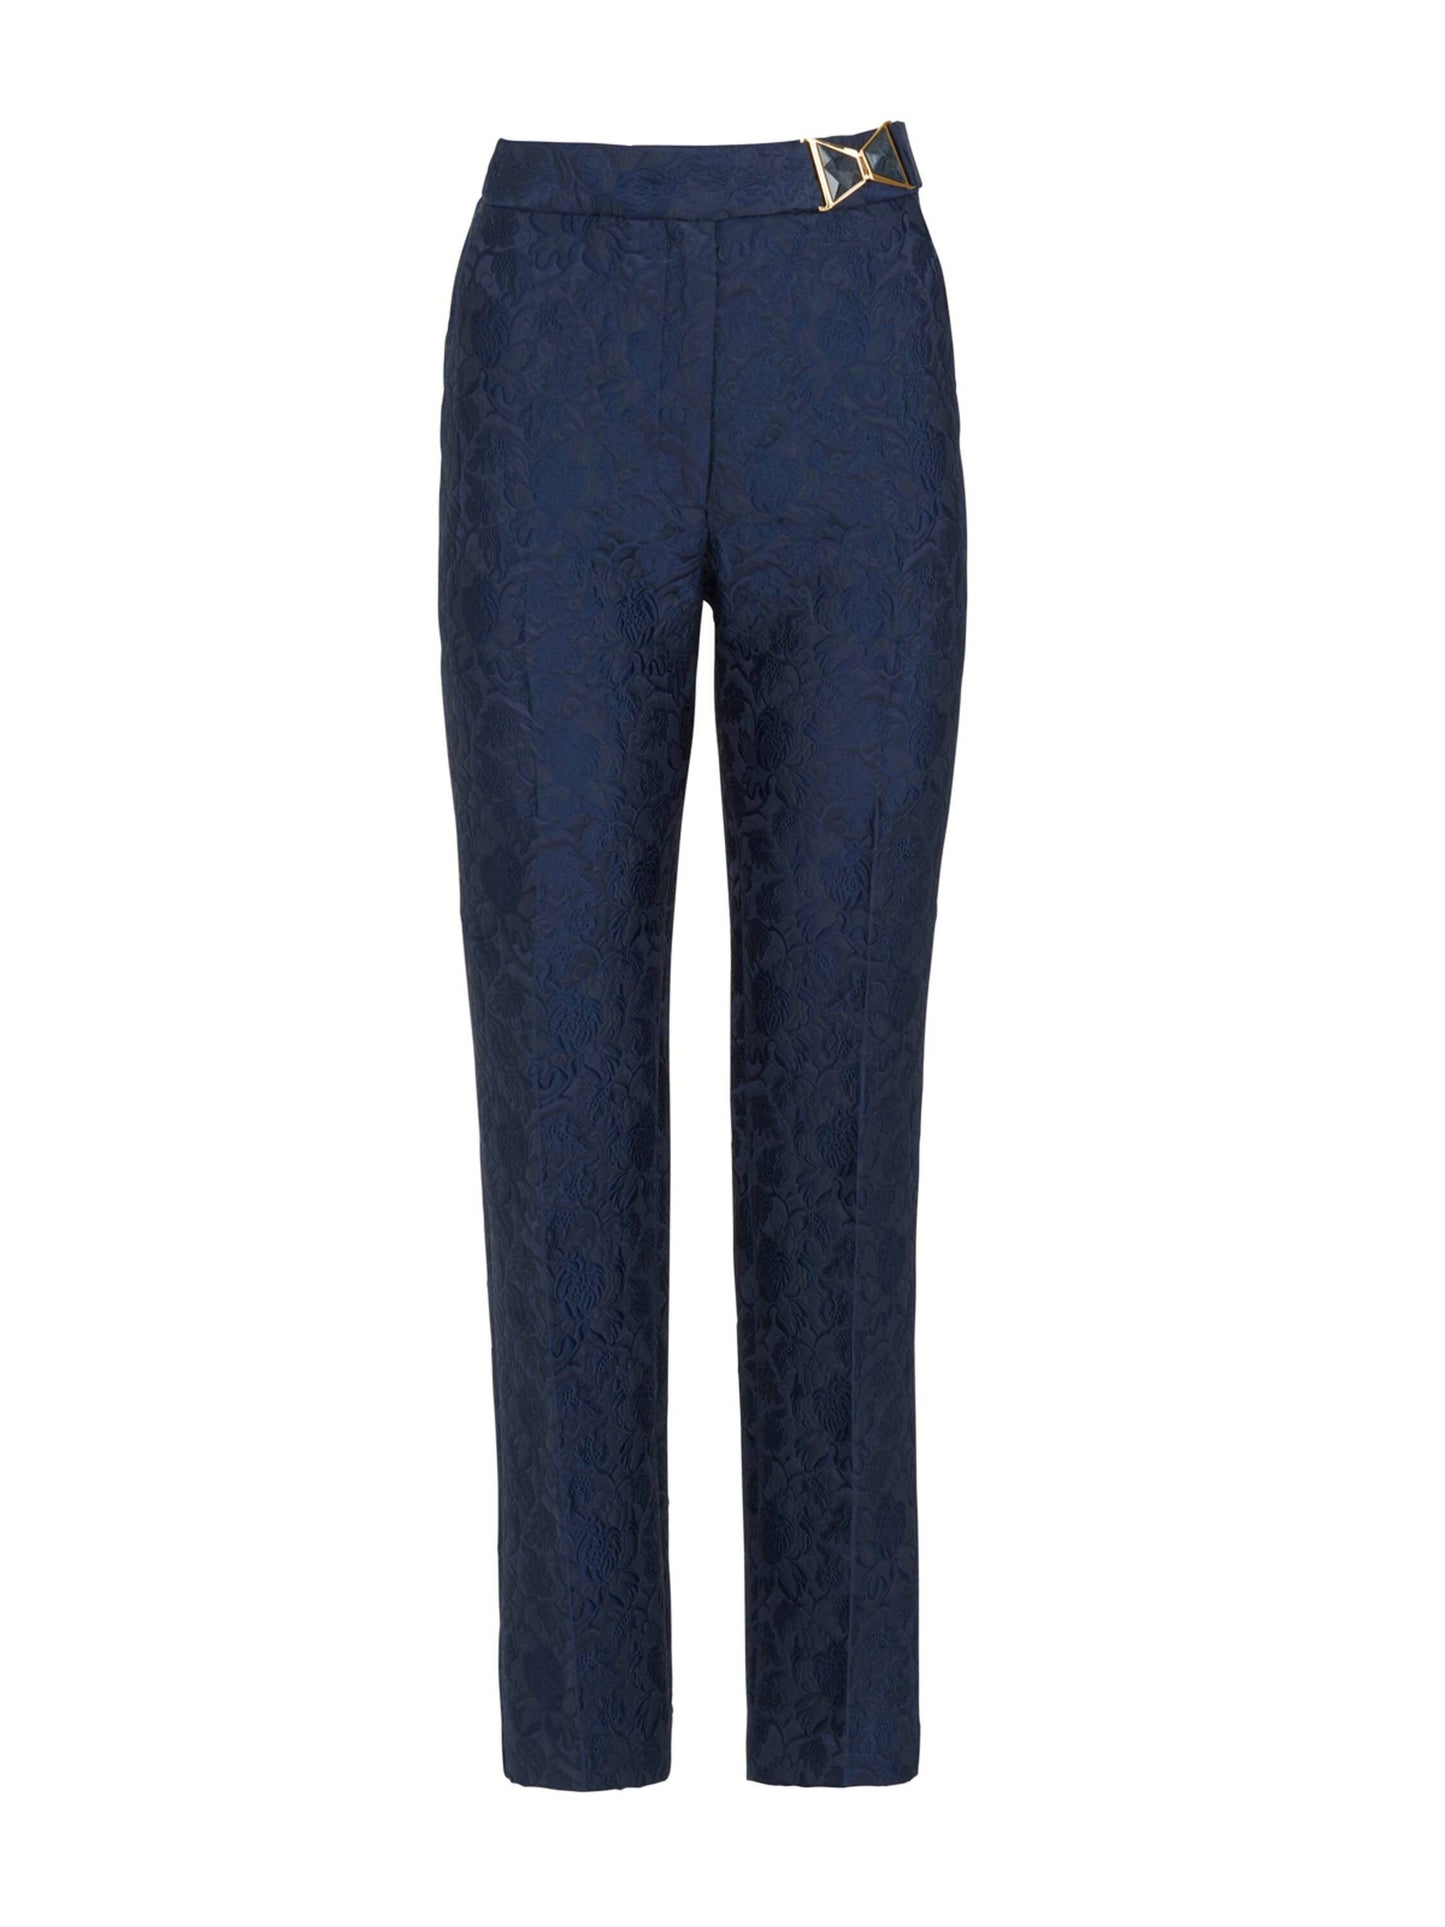 A woman's high-waisted Orion Pant Navy with a gold buckle.